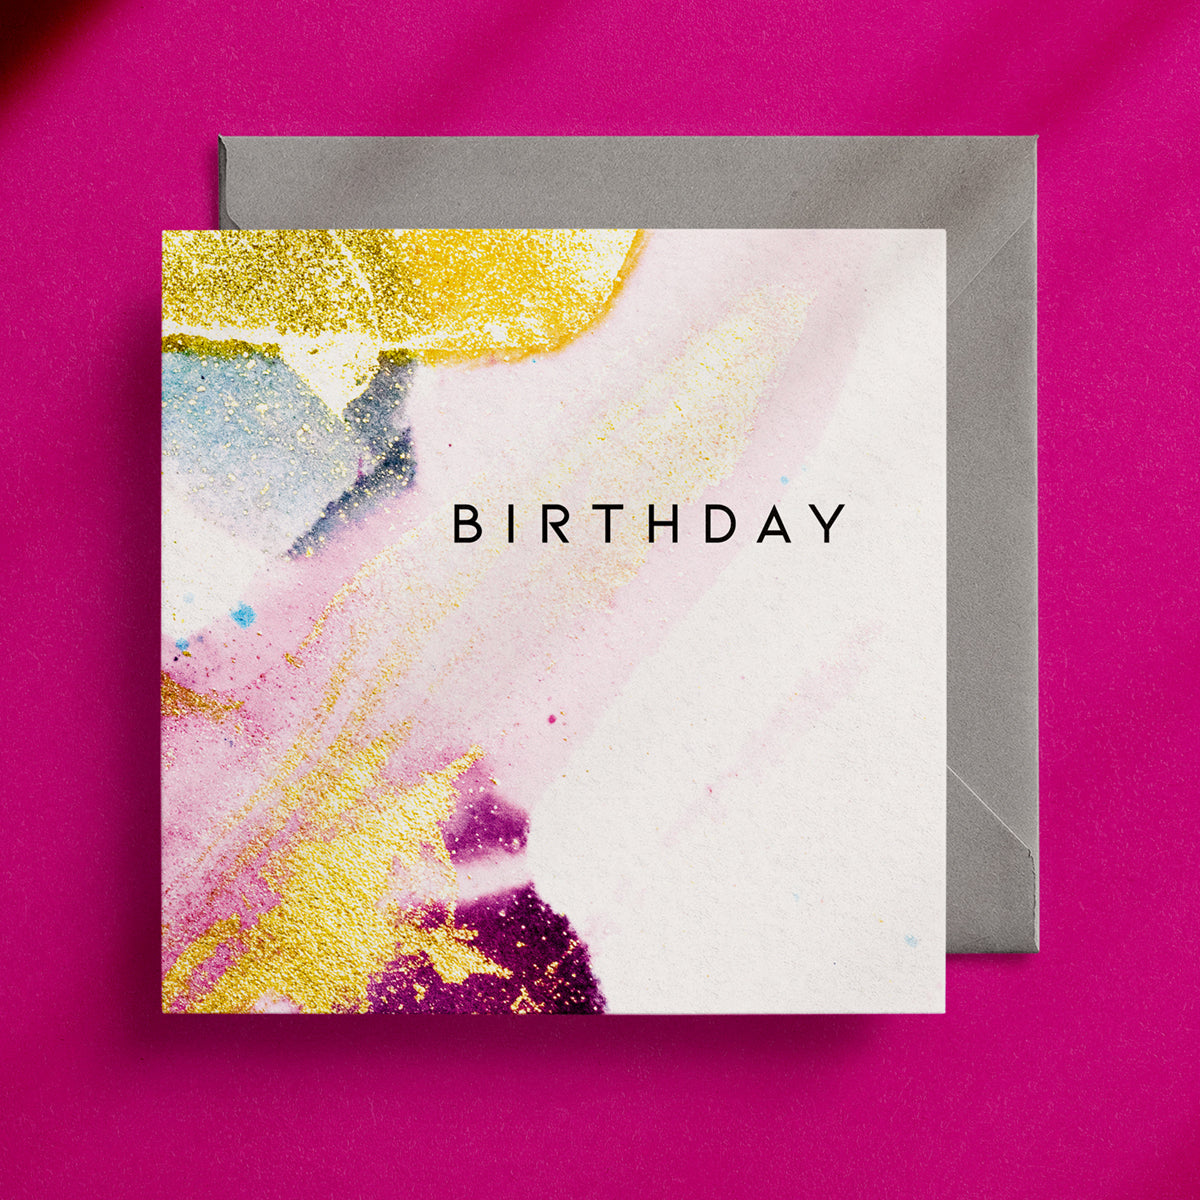 Pretty, feminine, pink, white and gold design on a square birthday card with a grey envelope